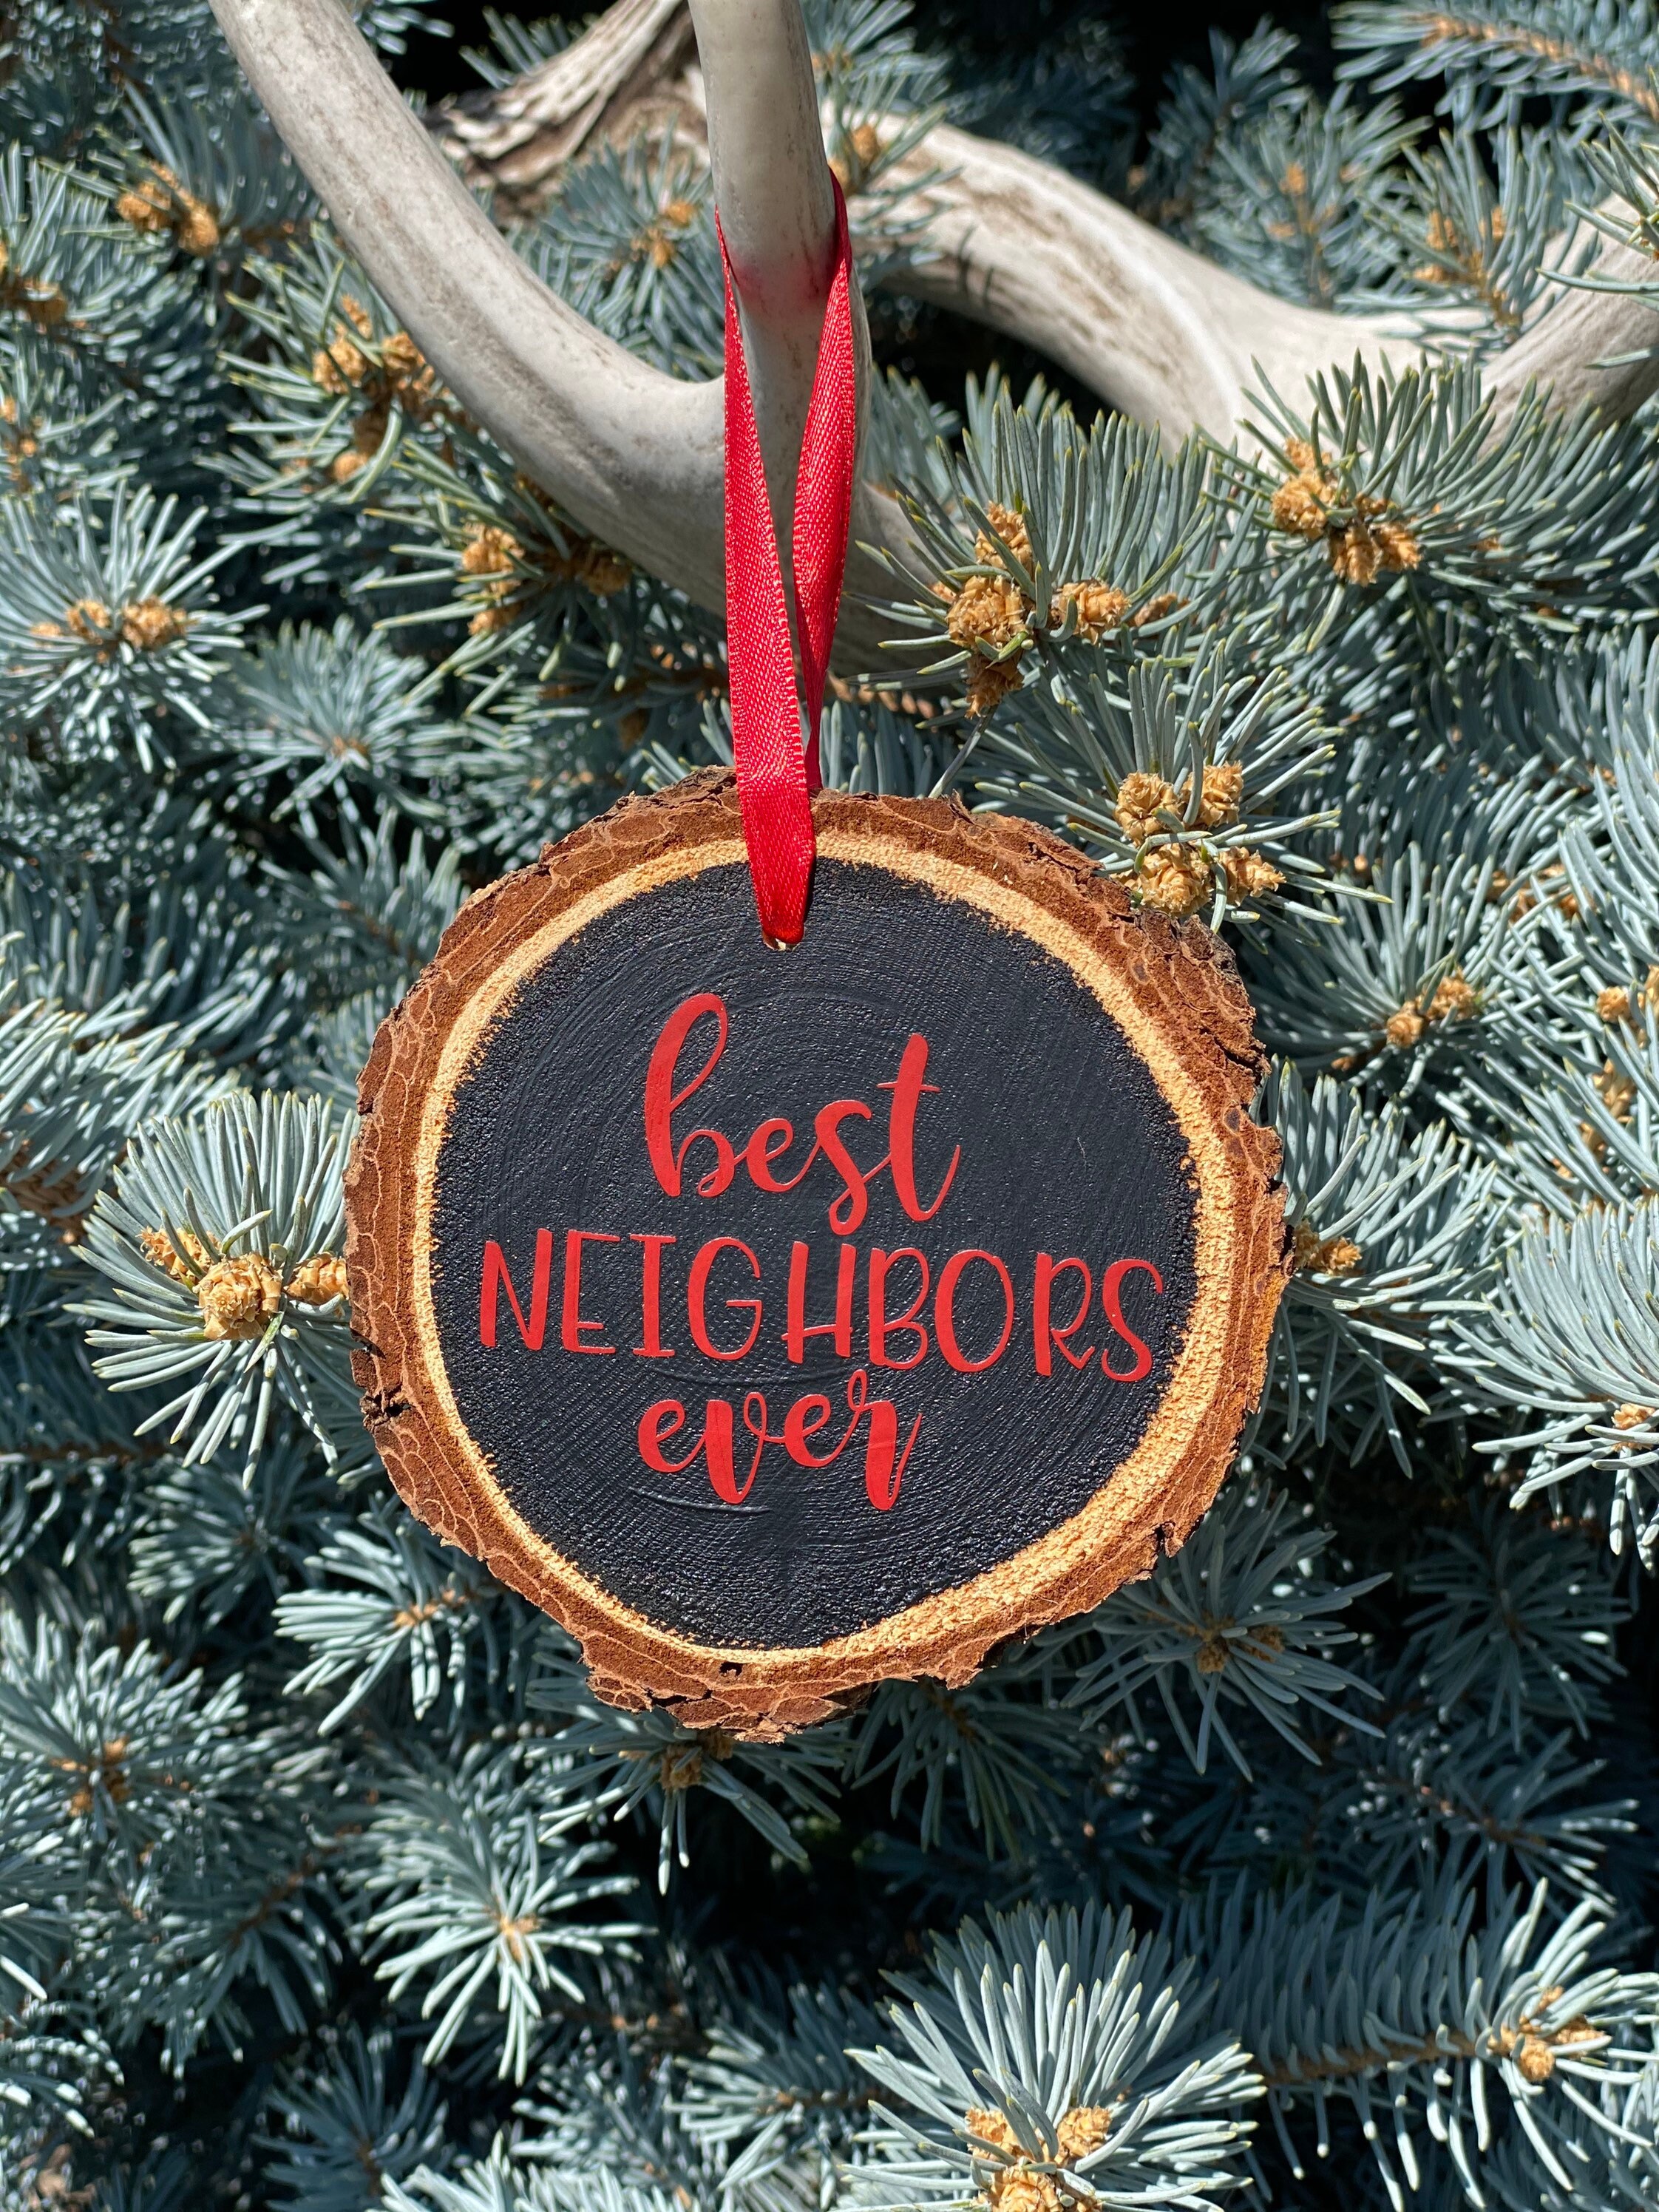 Worlds most Awesome Neighbor - Ornament